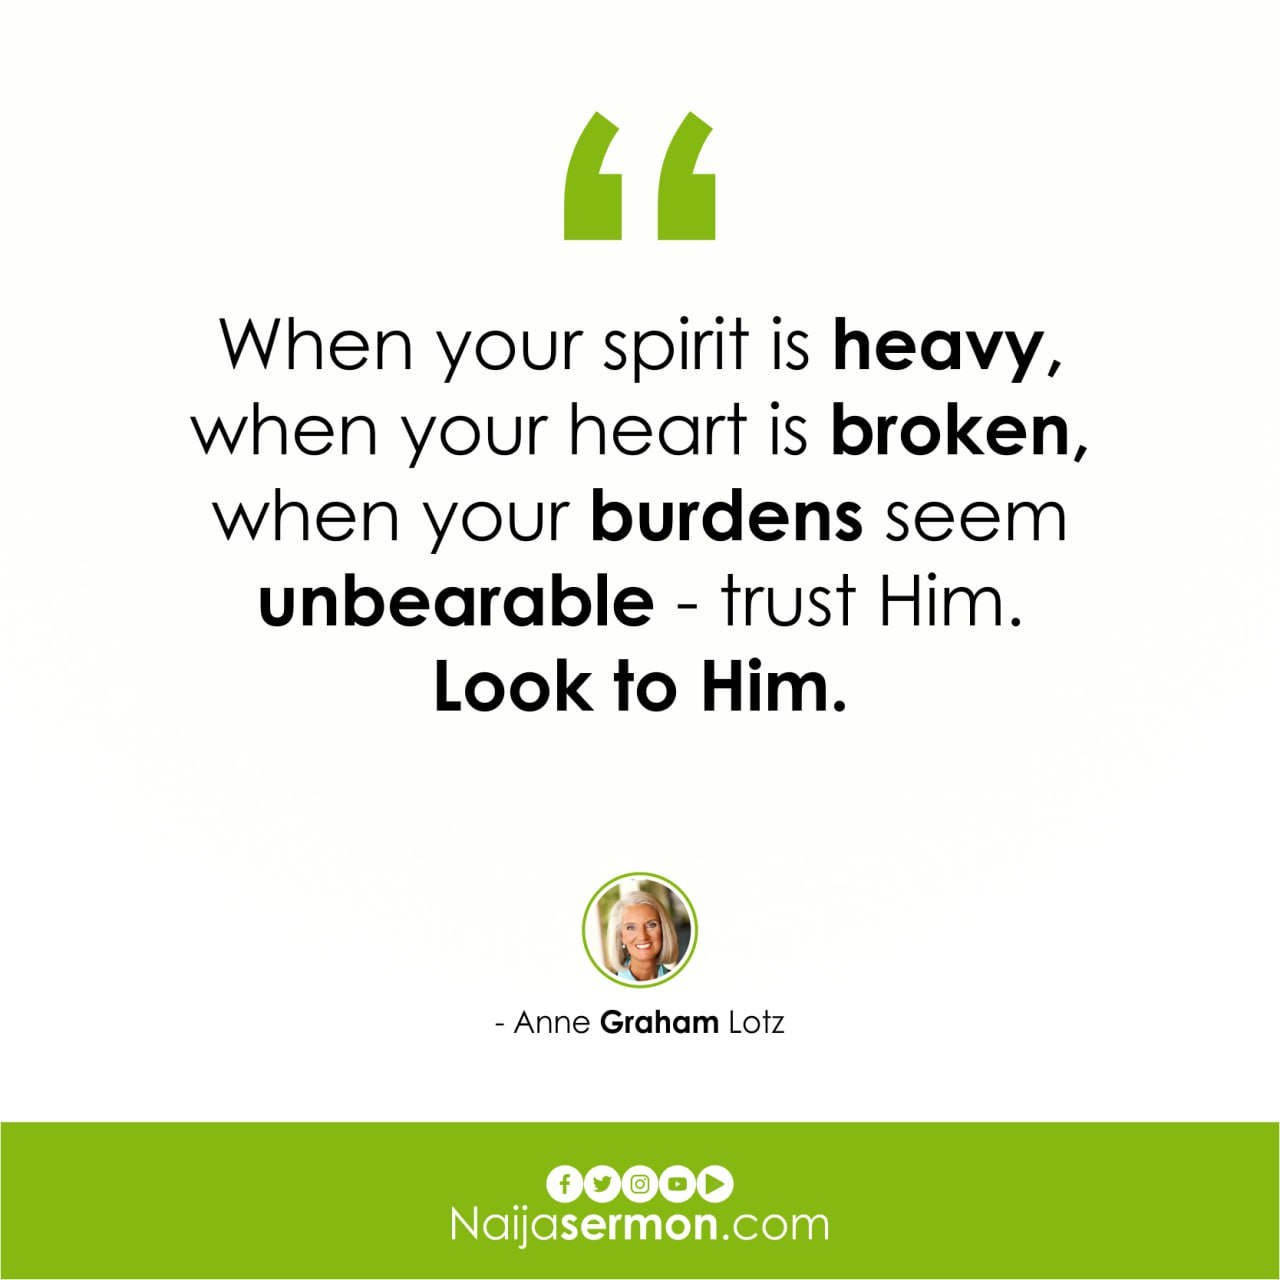 QUOTE OF THE DAY BY ANNE GRAHAM LOTZ 19